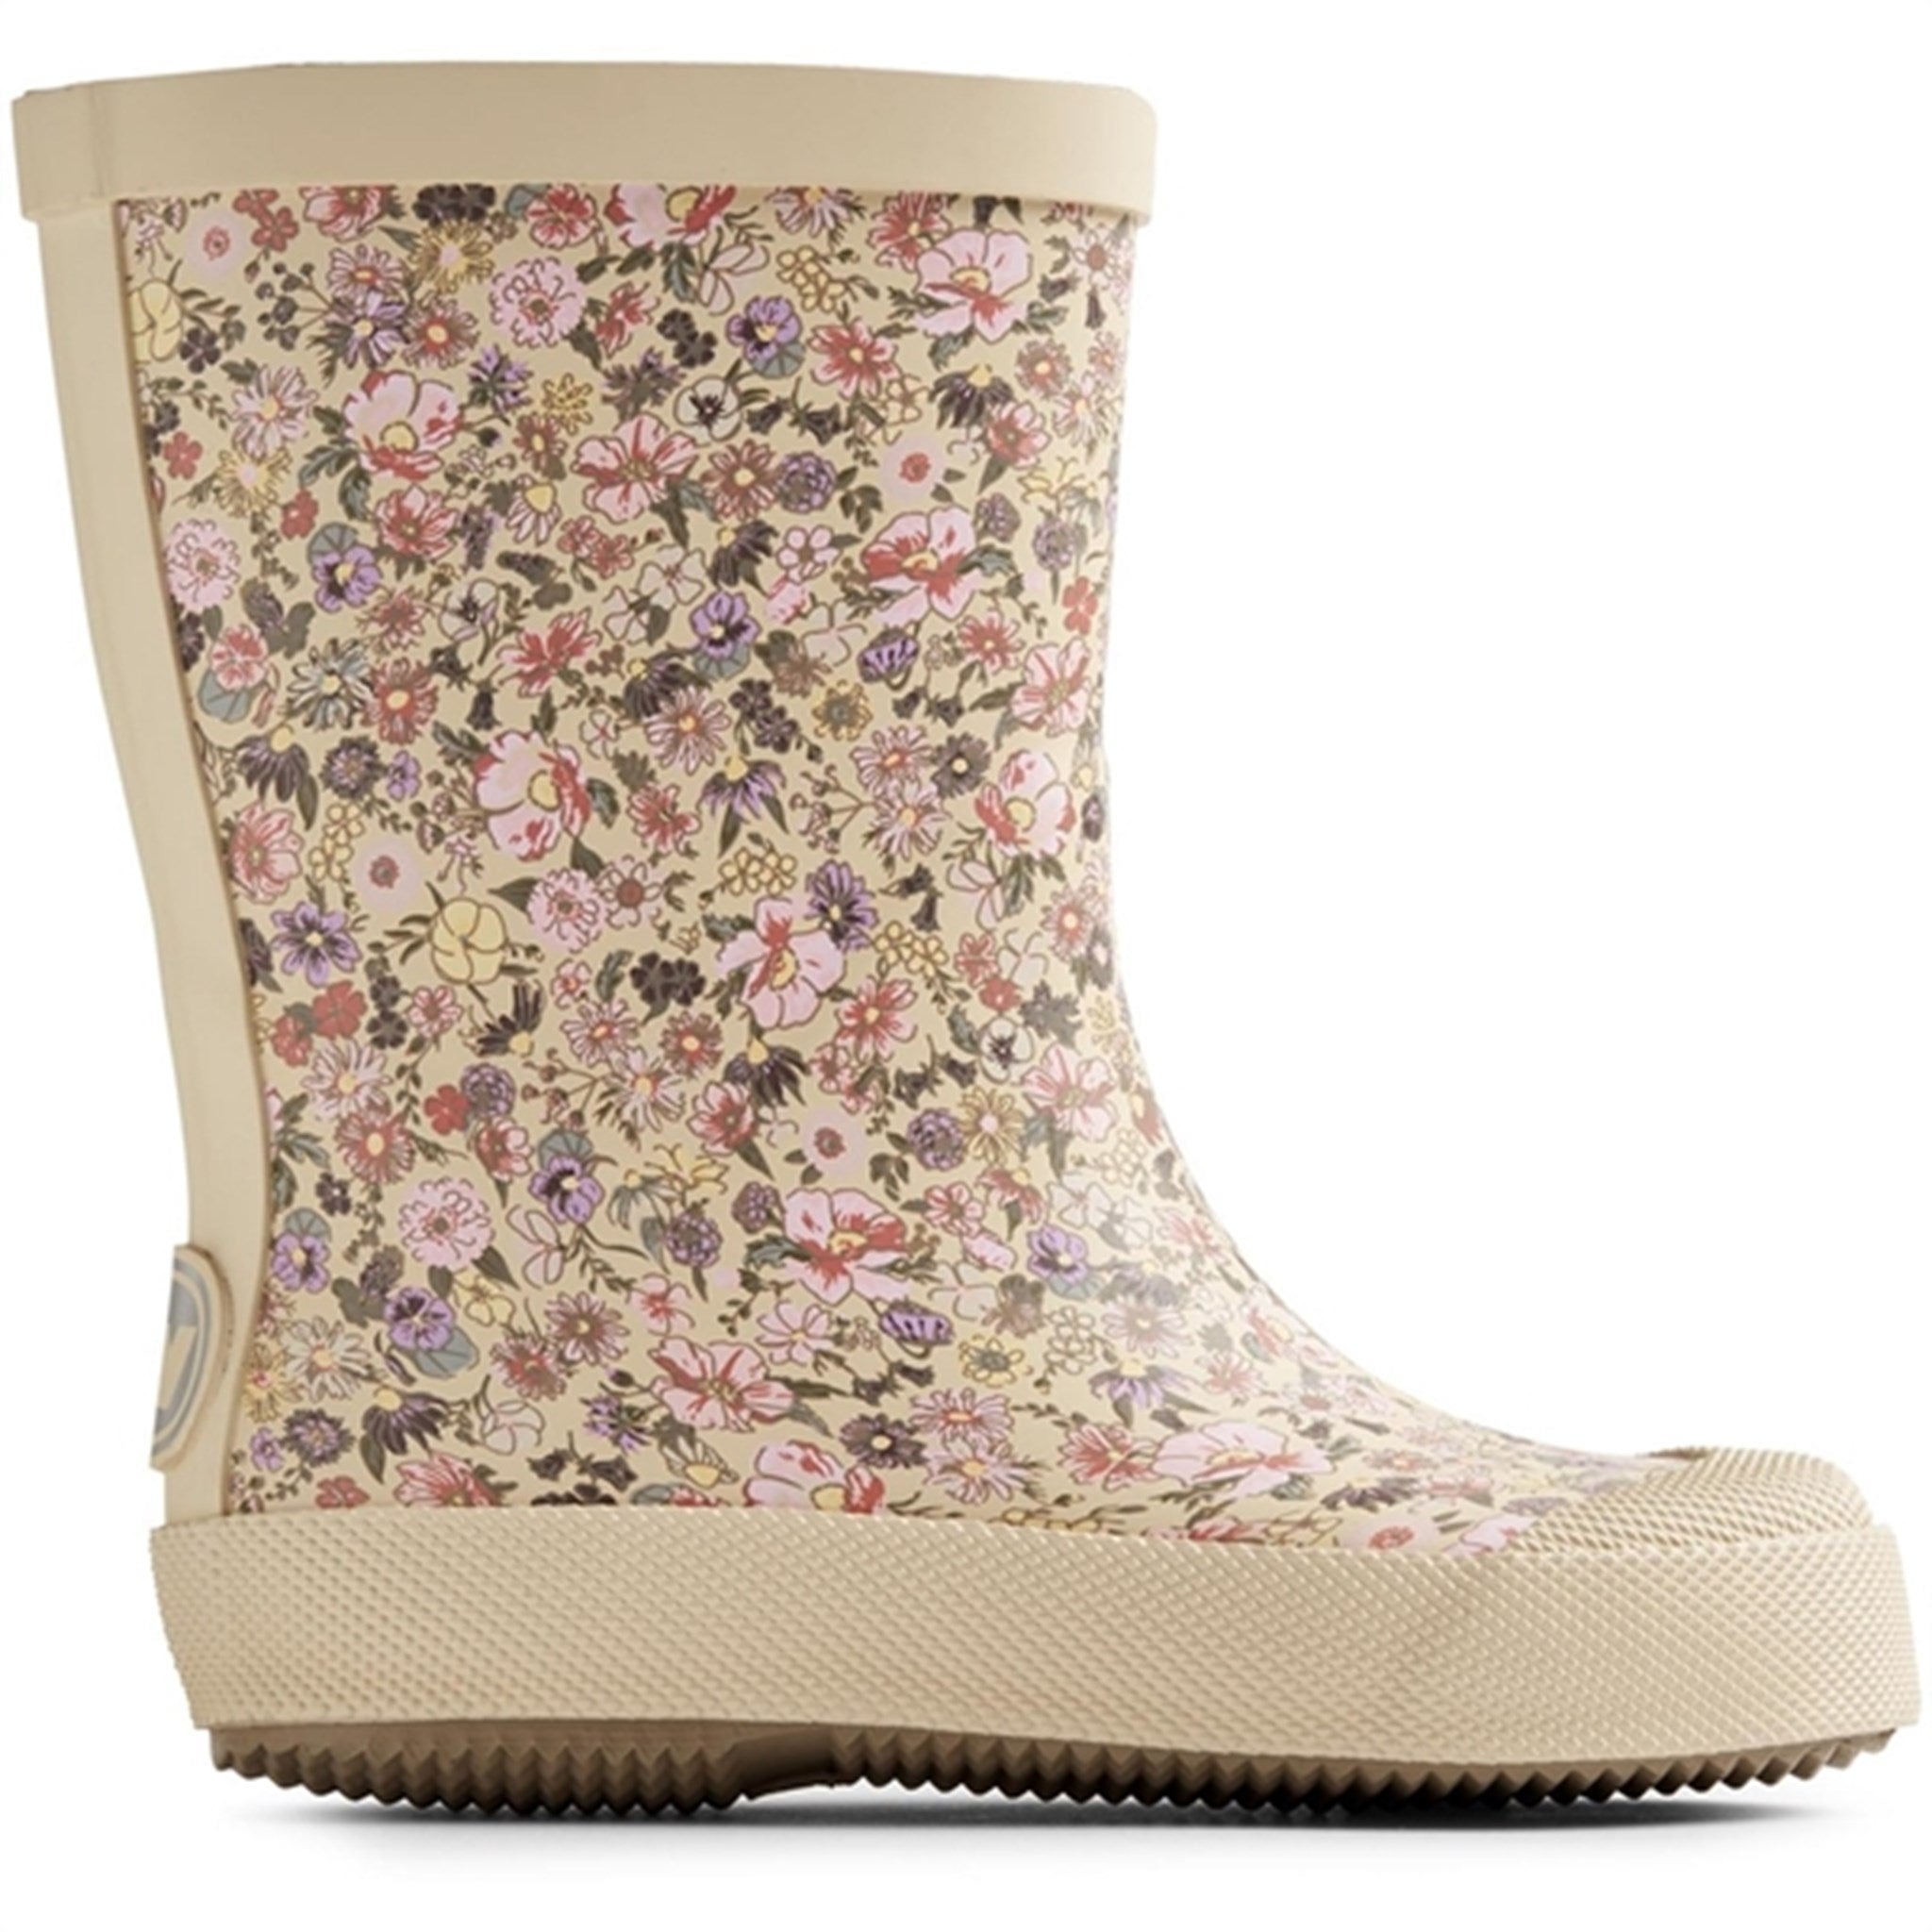 Wheat Rubber Boot Print Muddy Clam Multi Flowers 2